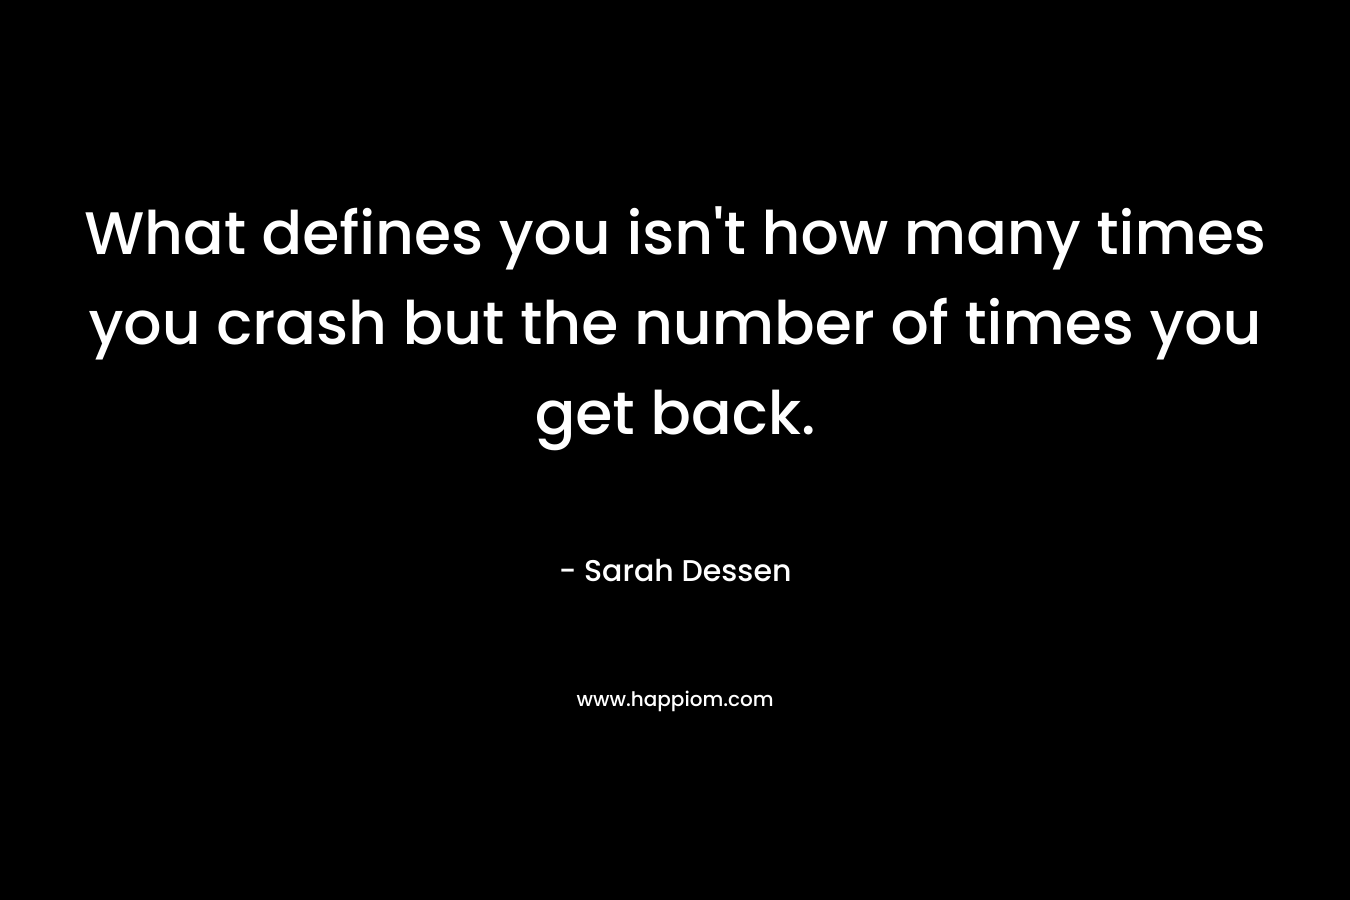 What defines you isn’t how many times you crash but the number of times you get back. – Sarah Dessen